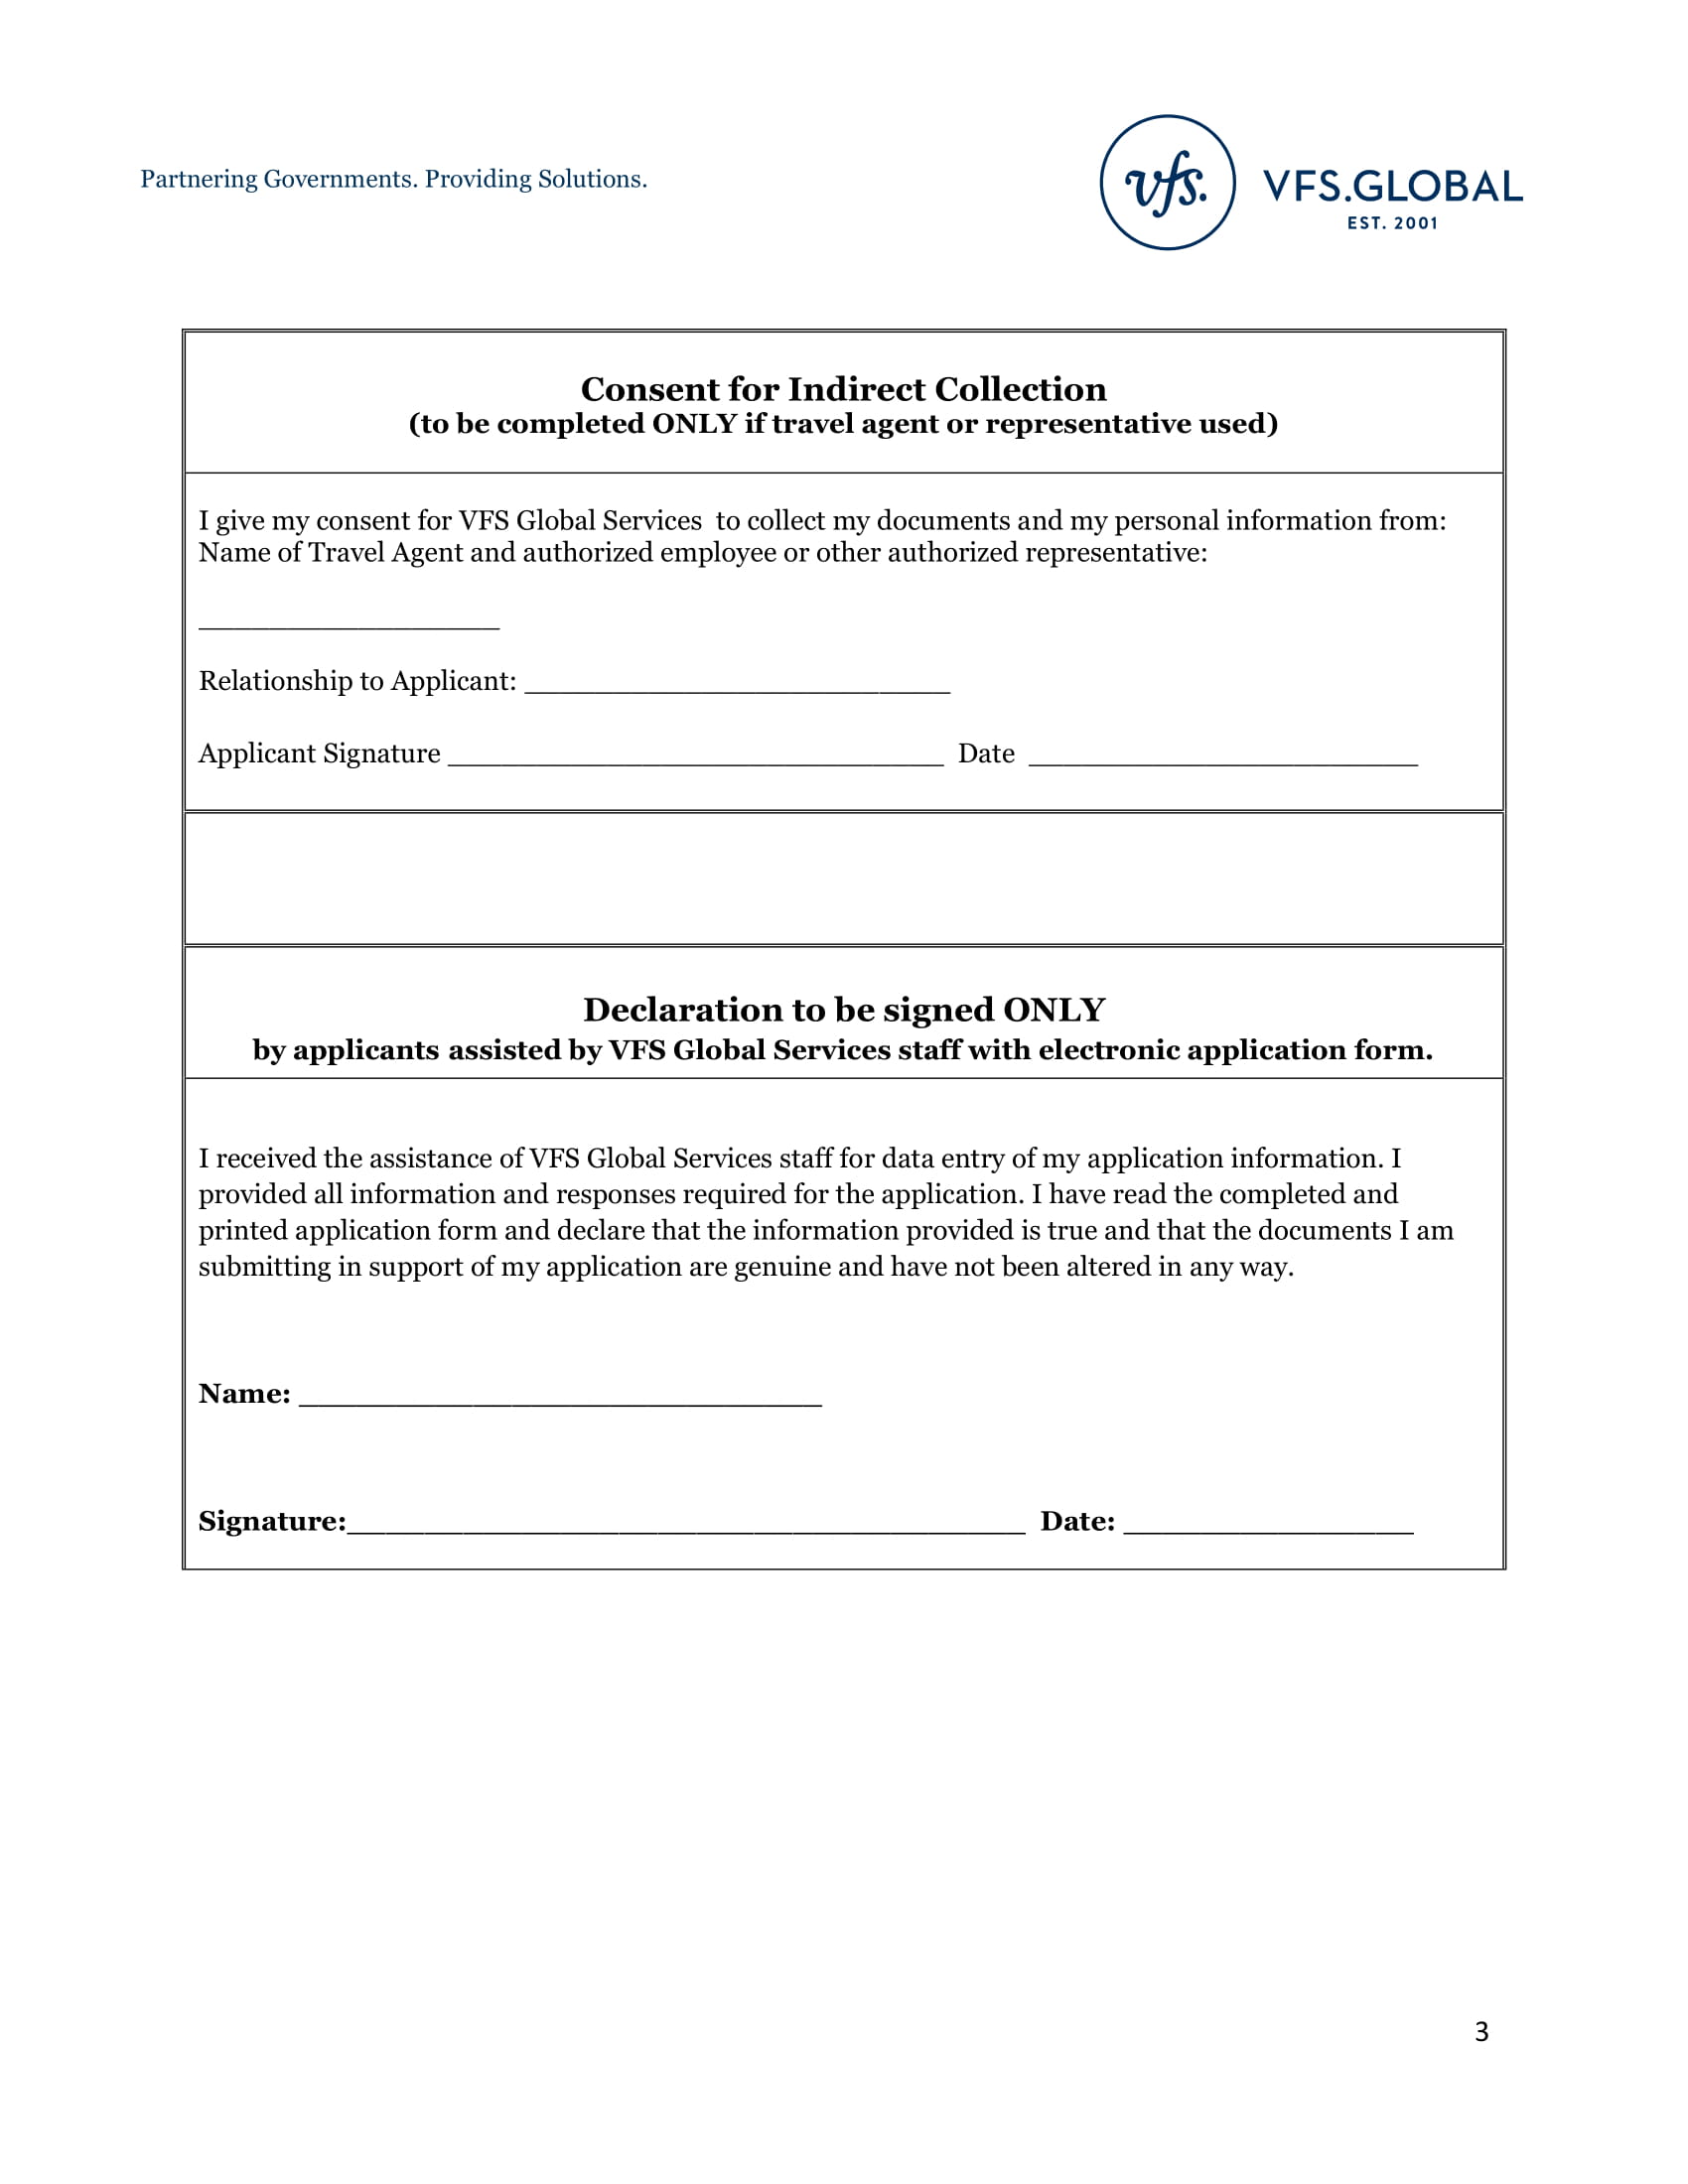 consent for indirect collection form 3